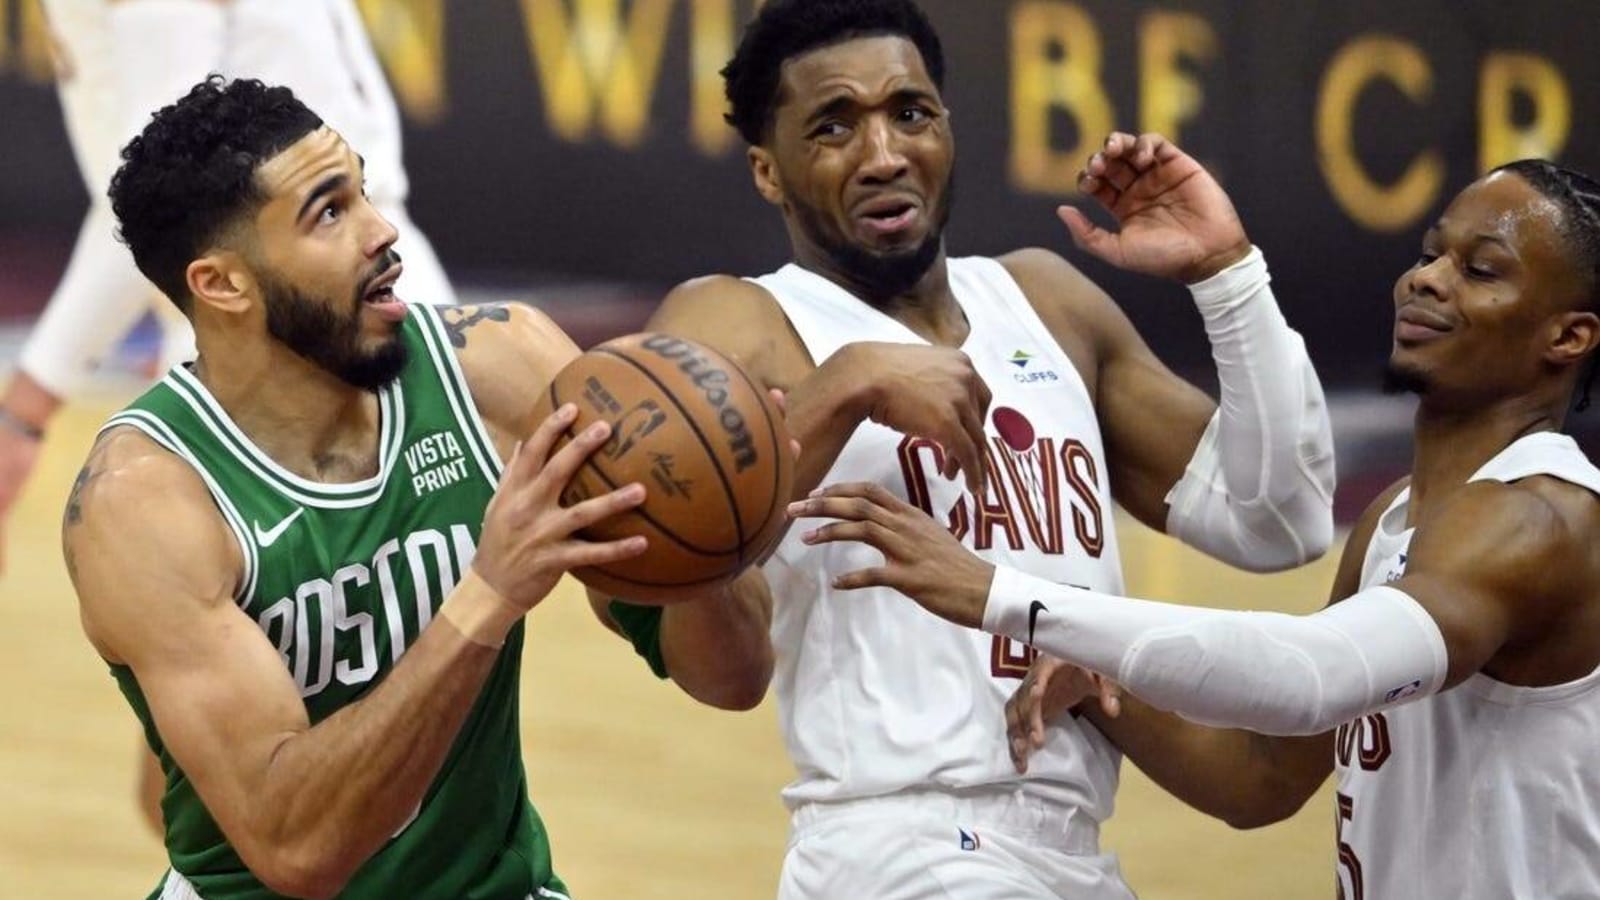 Back on track, Celtics chase commanding series lead on Cavs